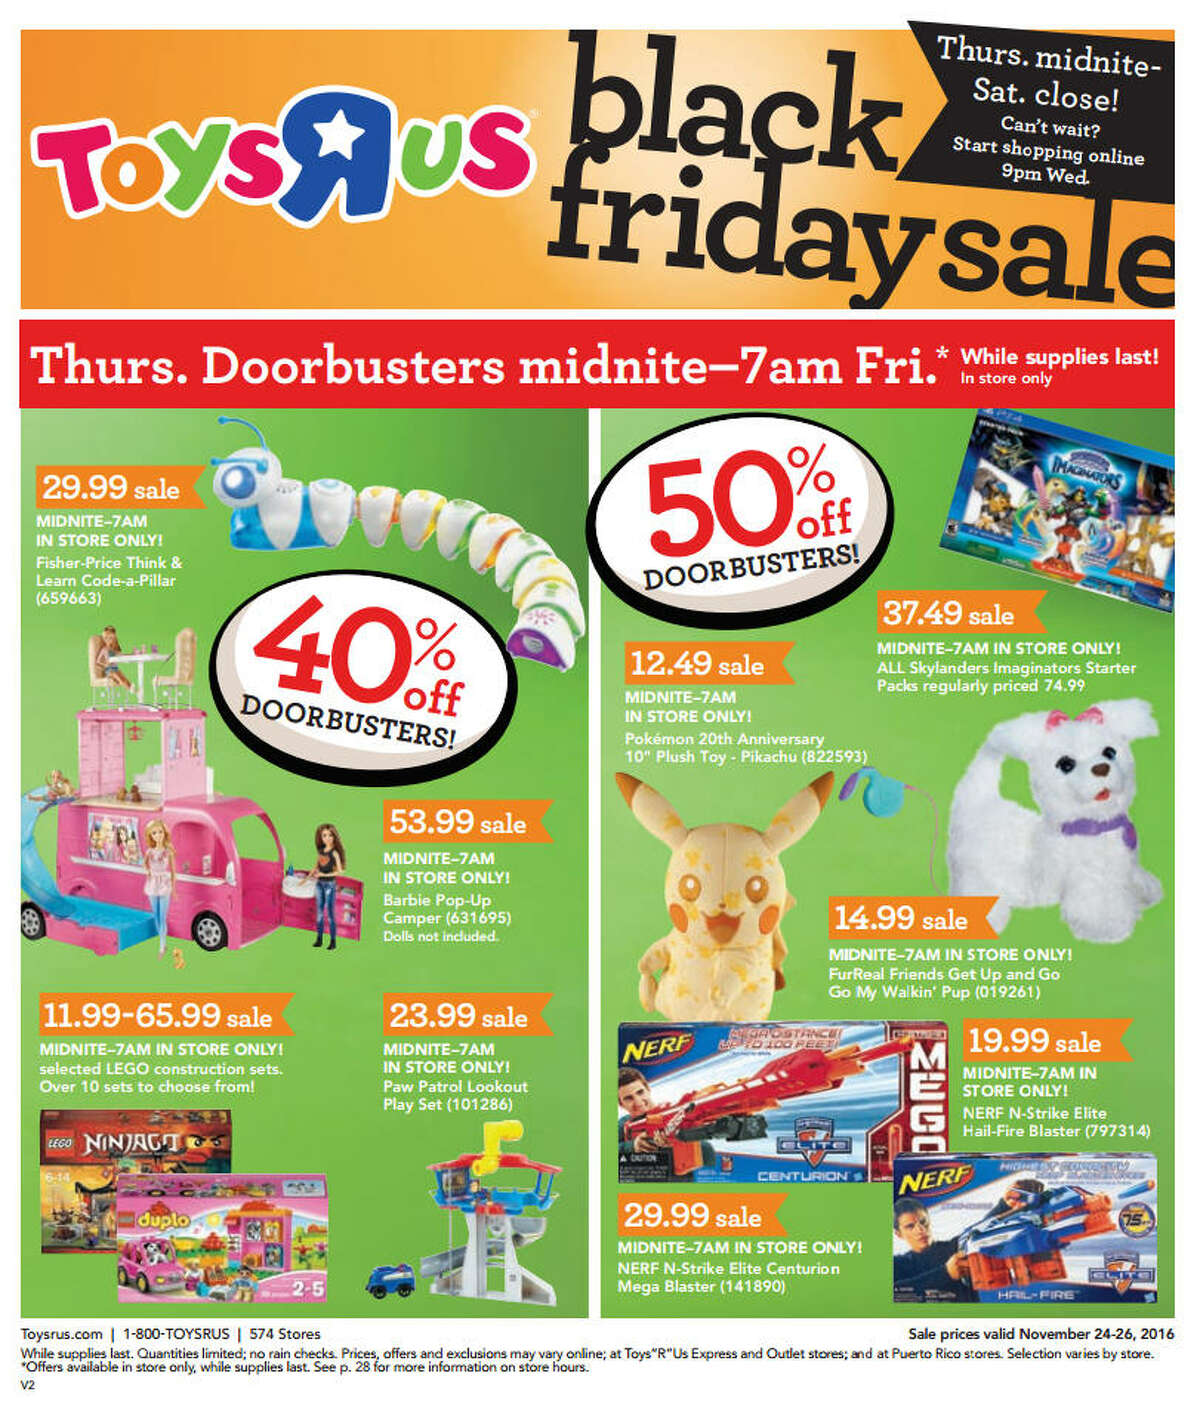 Toys "R" Us Black Friday 2016 ad circular released - Will Toys R Us Black Friday Deals Be Online